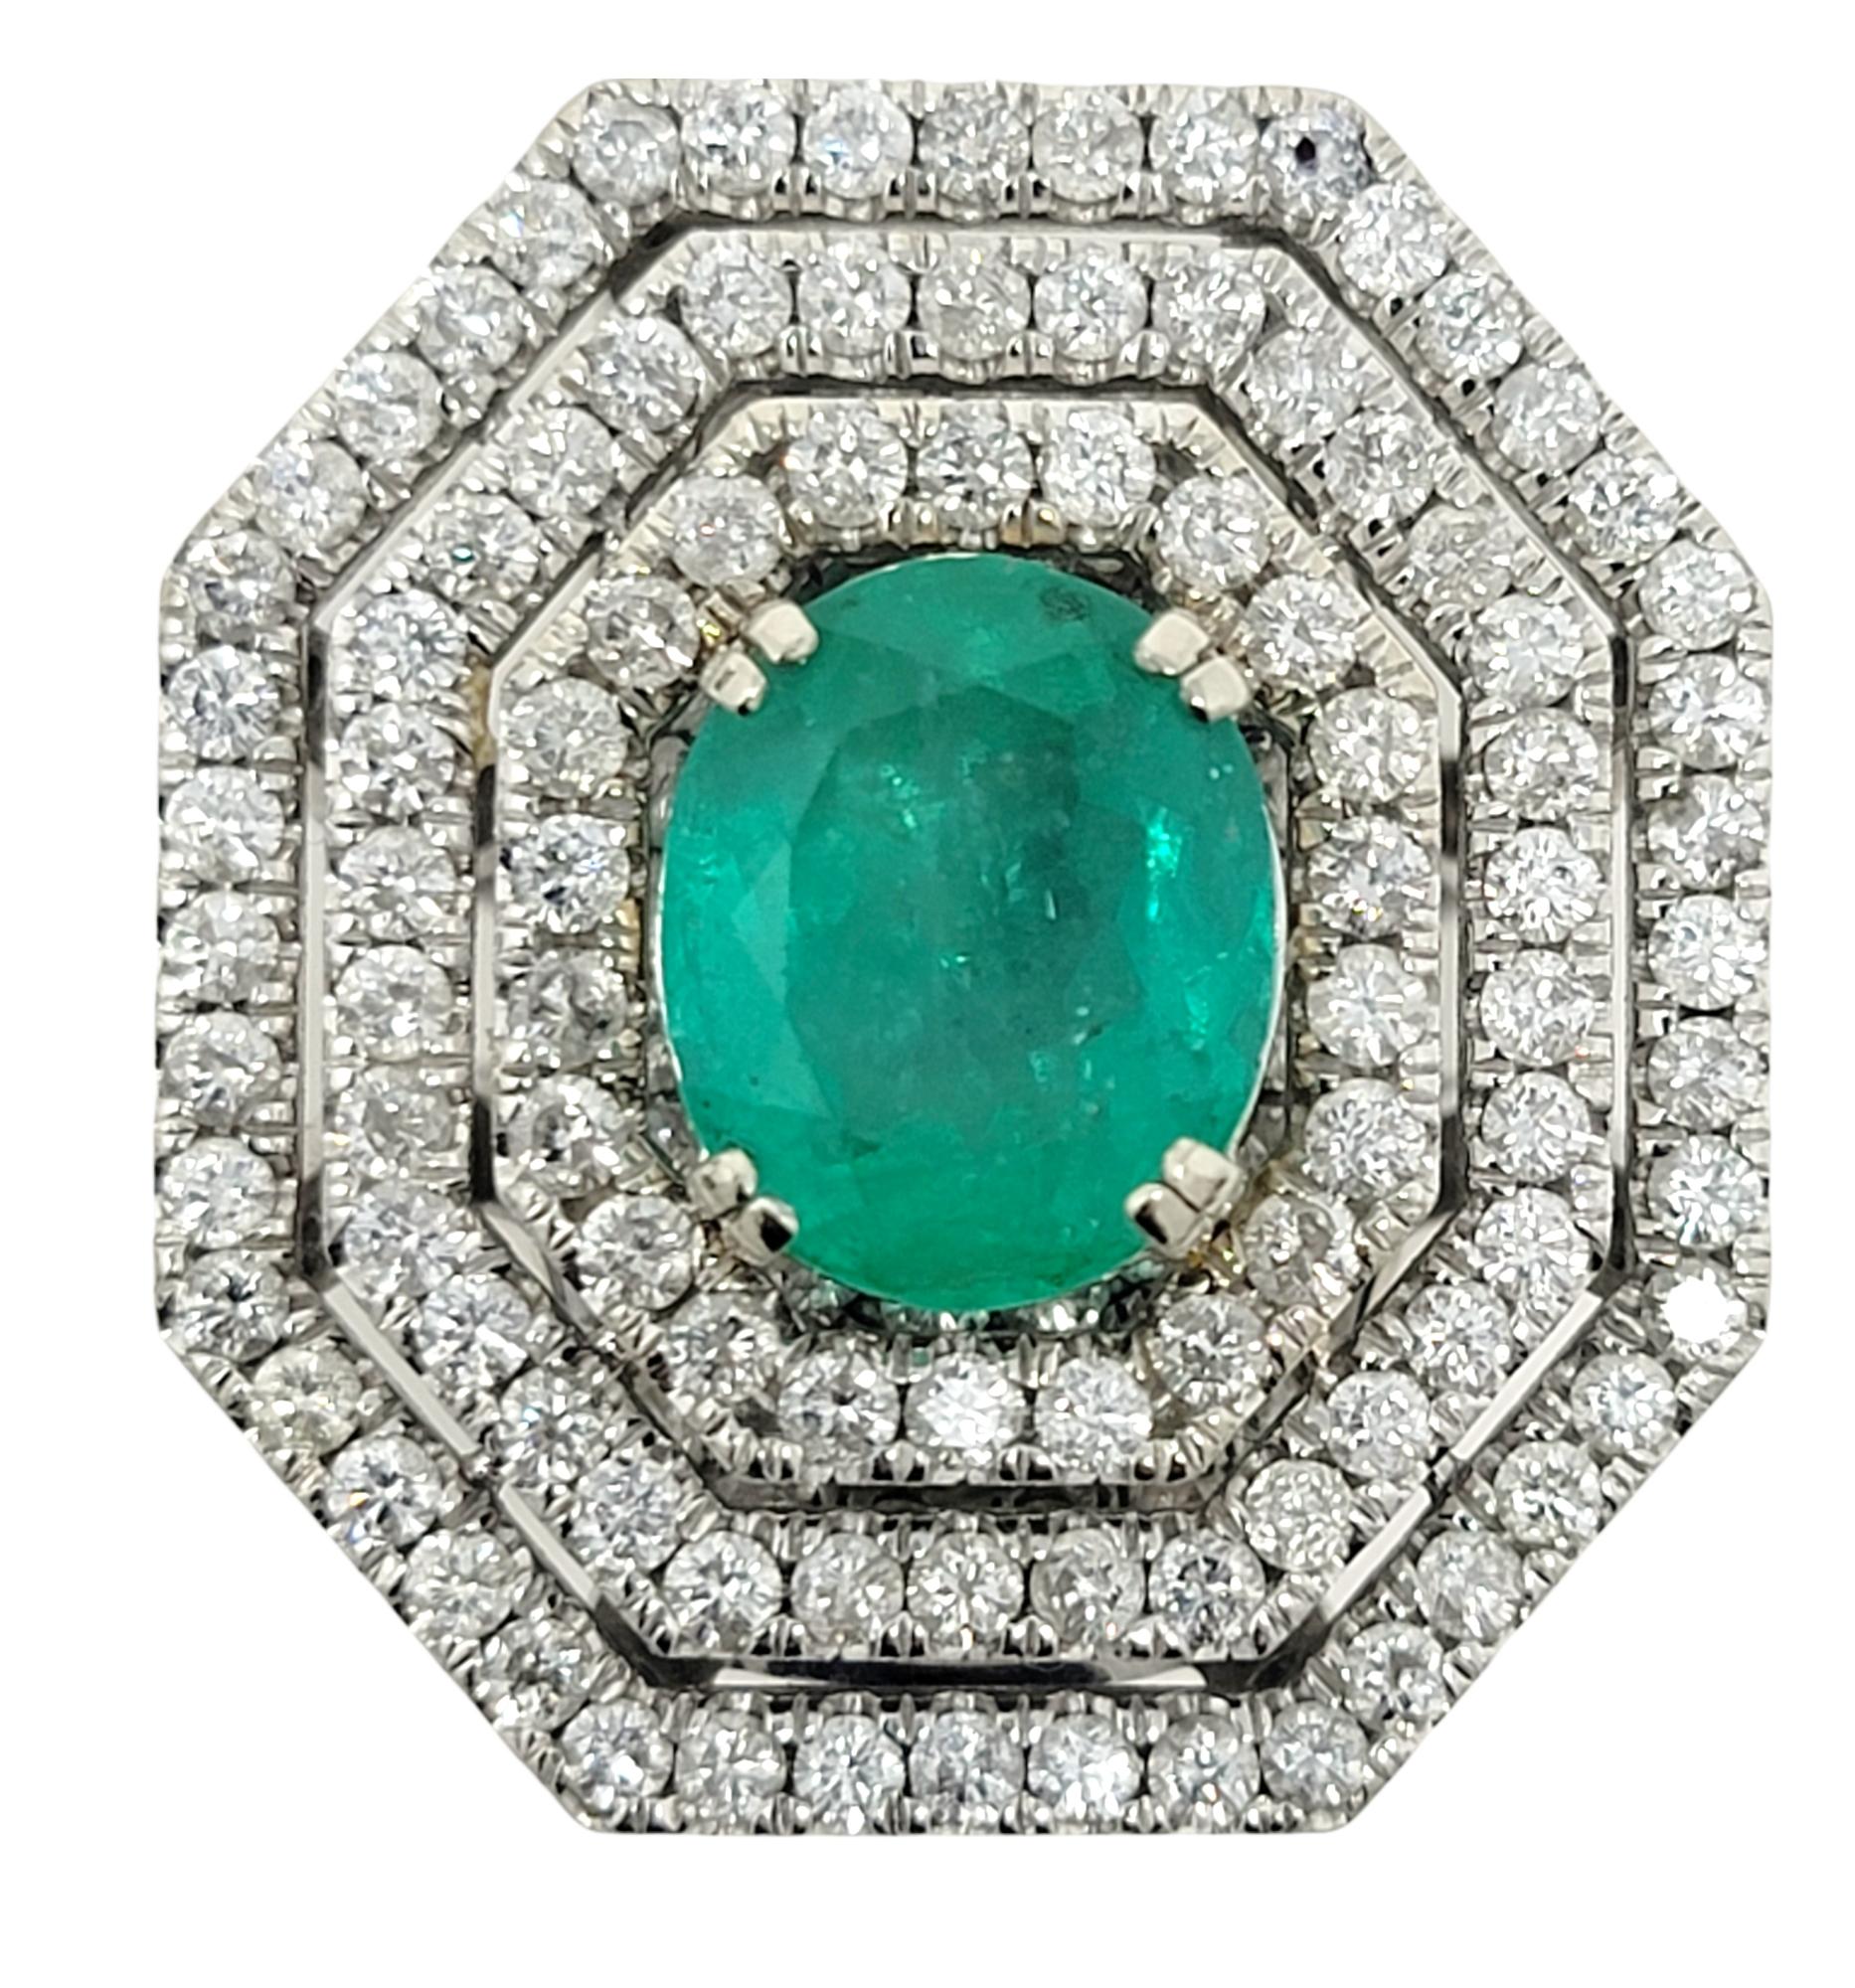 Ring size: 7

This incredible, jaw-dropping emerald and diamond cocktail ring is the absolute epitome of glamour. It features a single oval cut natural emerald in a stunning bluish-green color, double prong set at the center of the piece. A triple